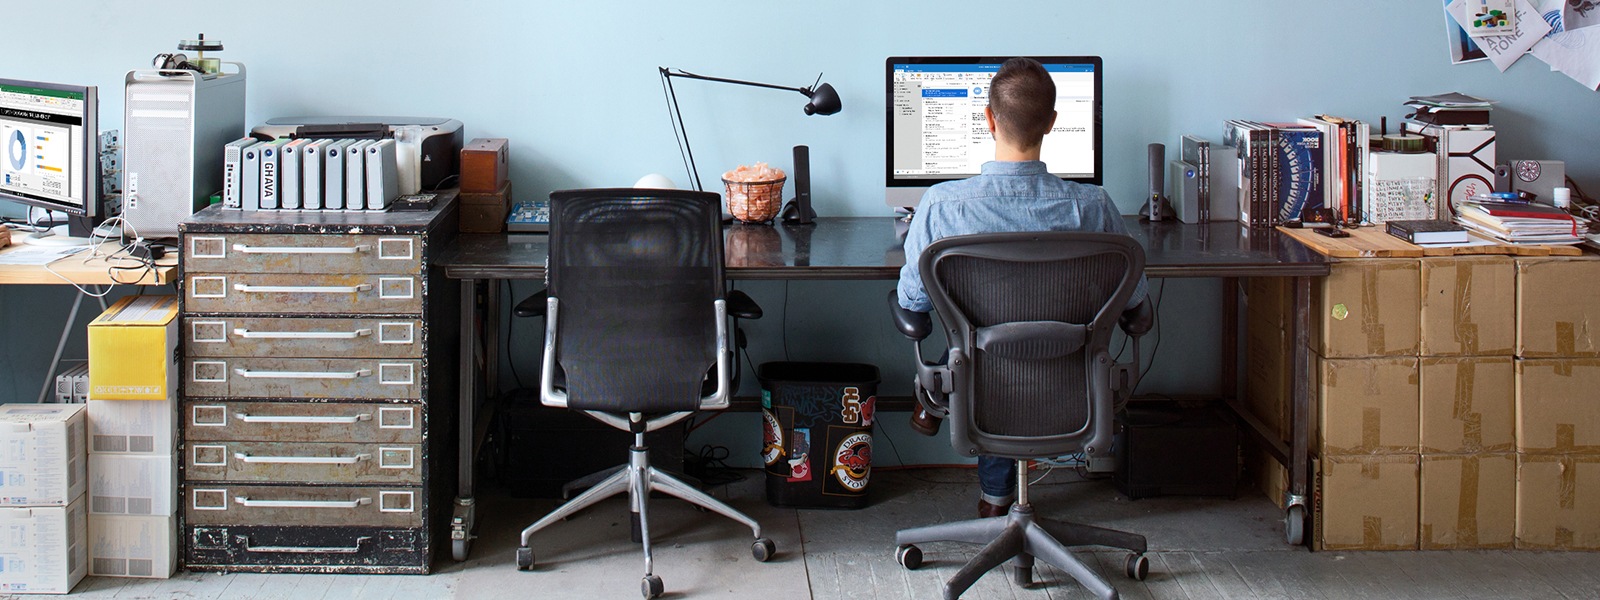 Man sitting at office desk on computer